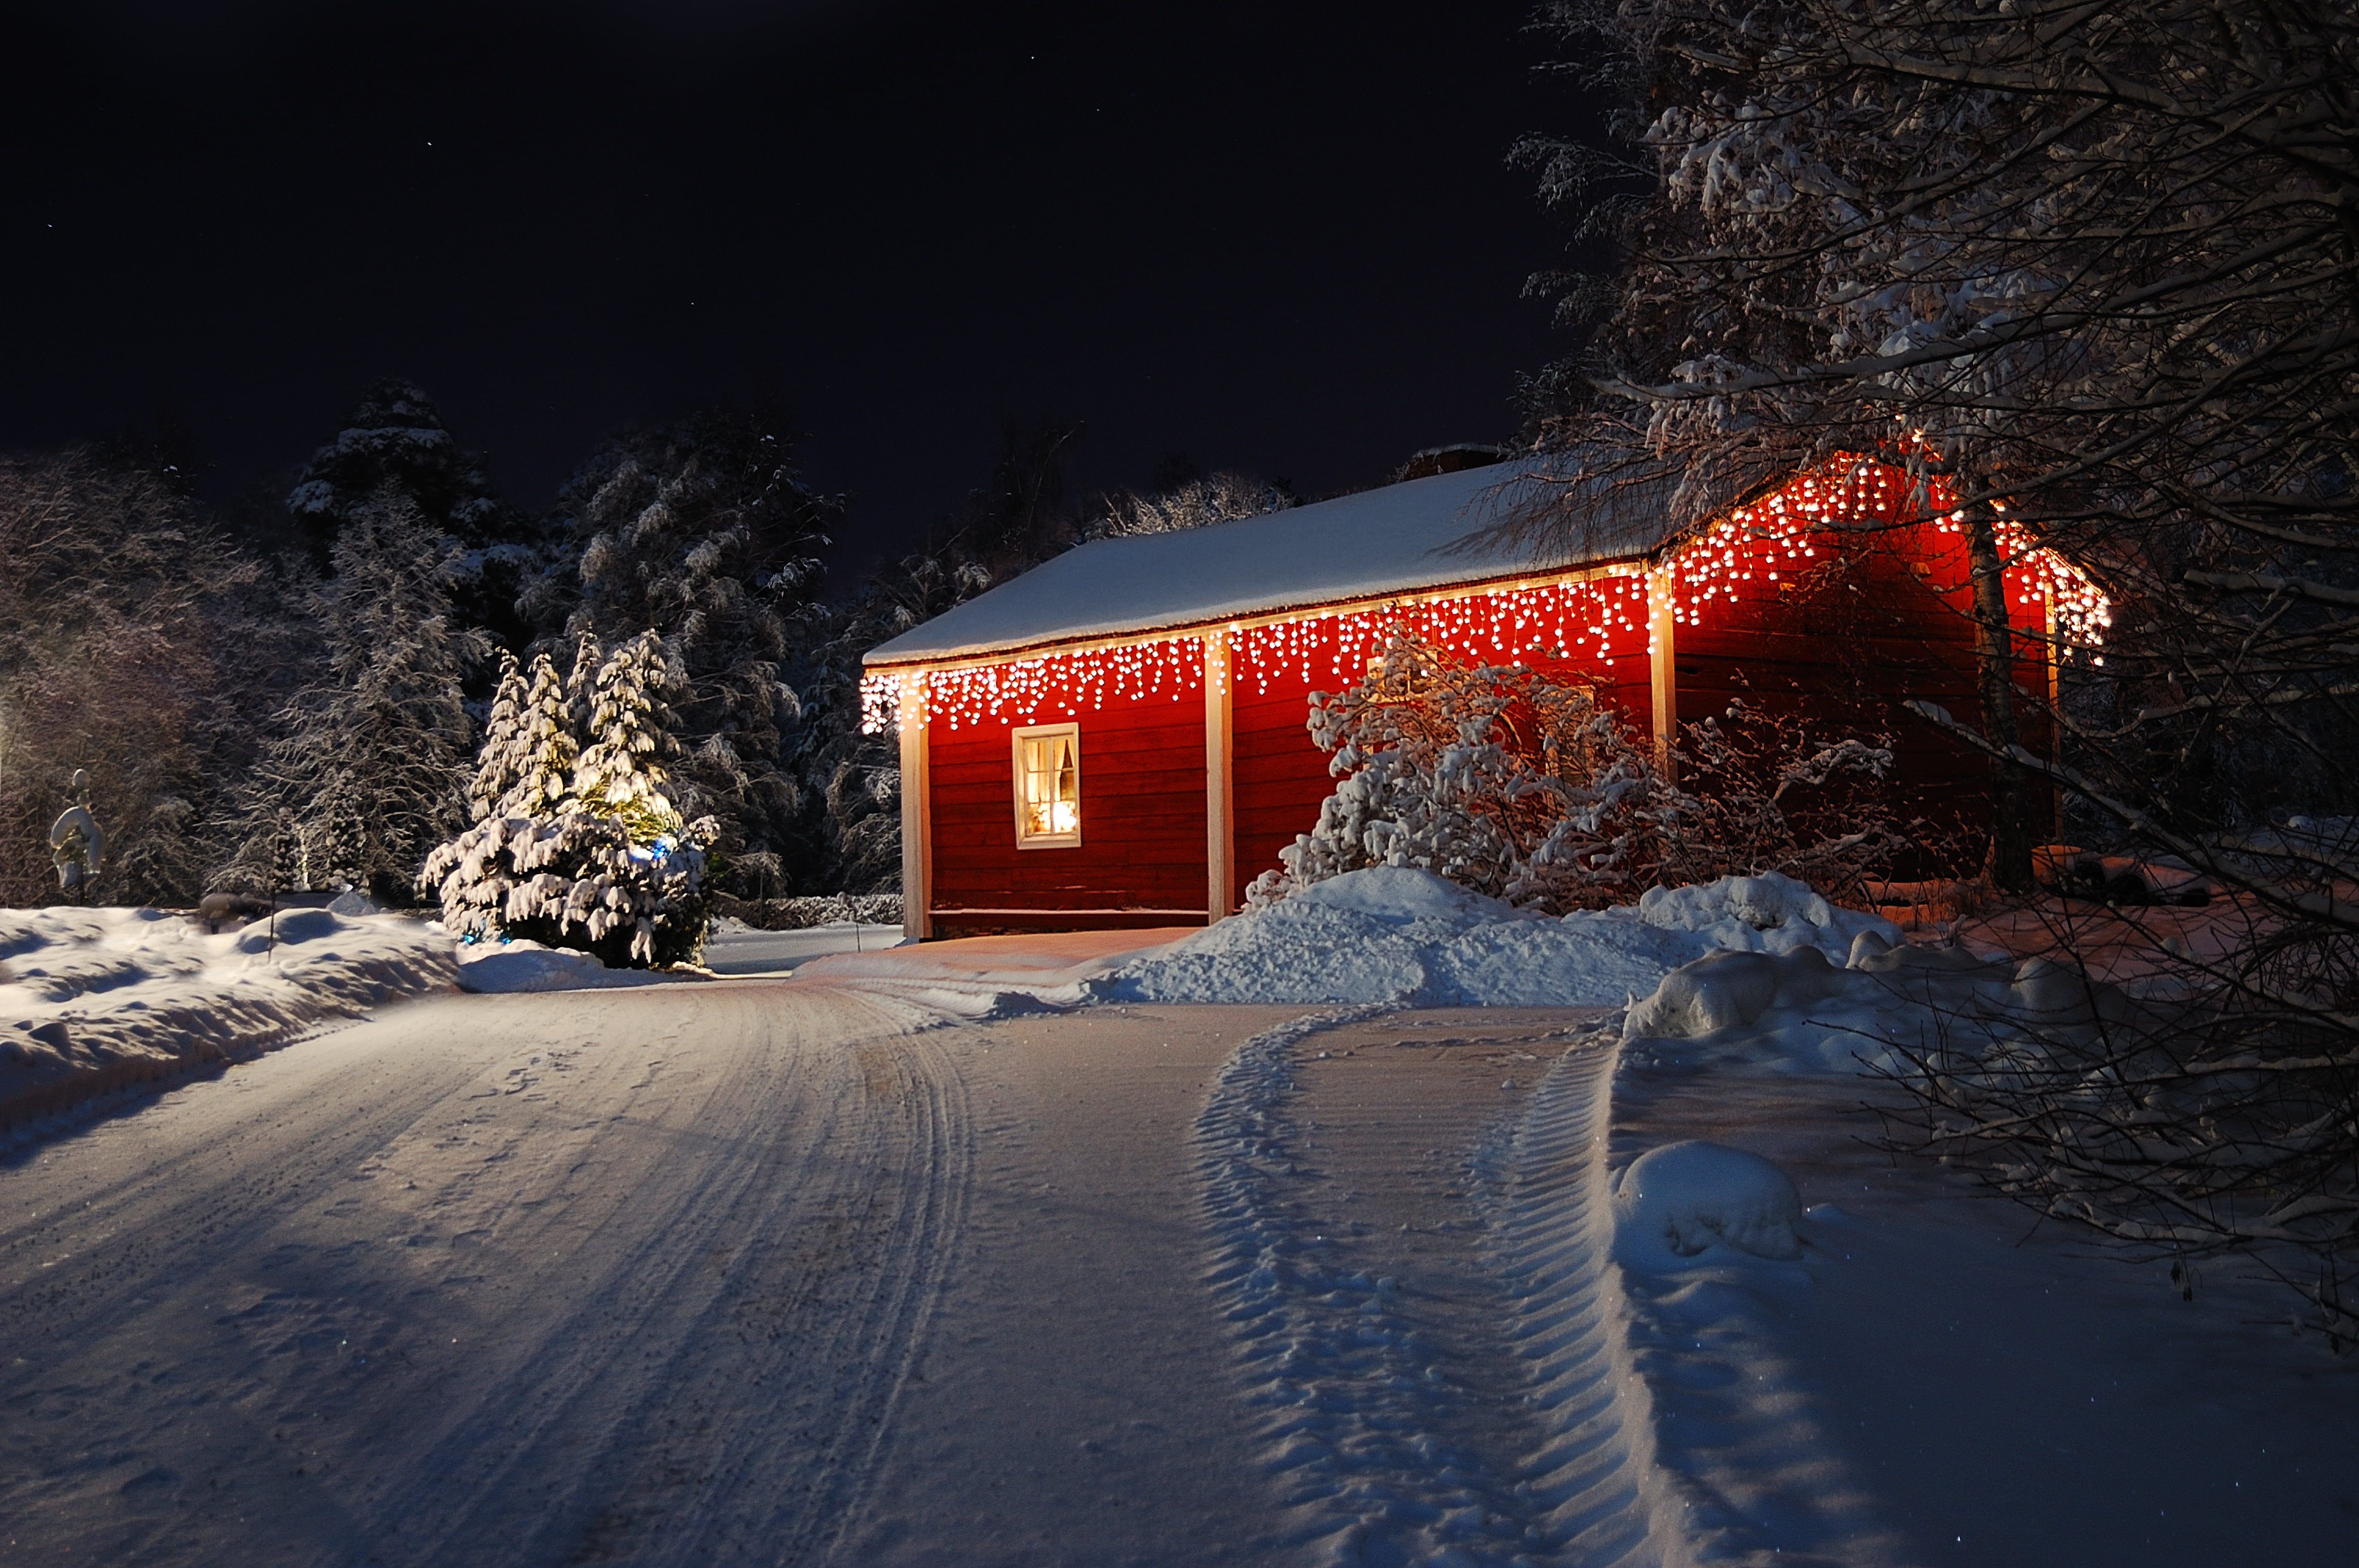 red wooden tool shed, winter, road, forest, snow, trees, nature